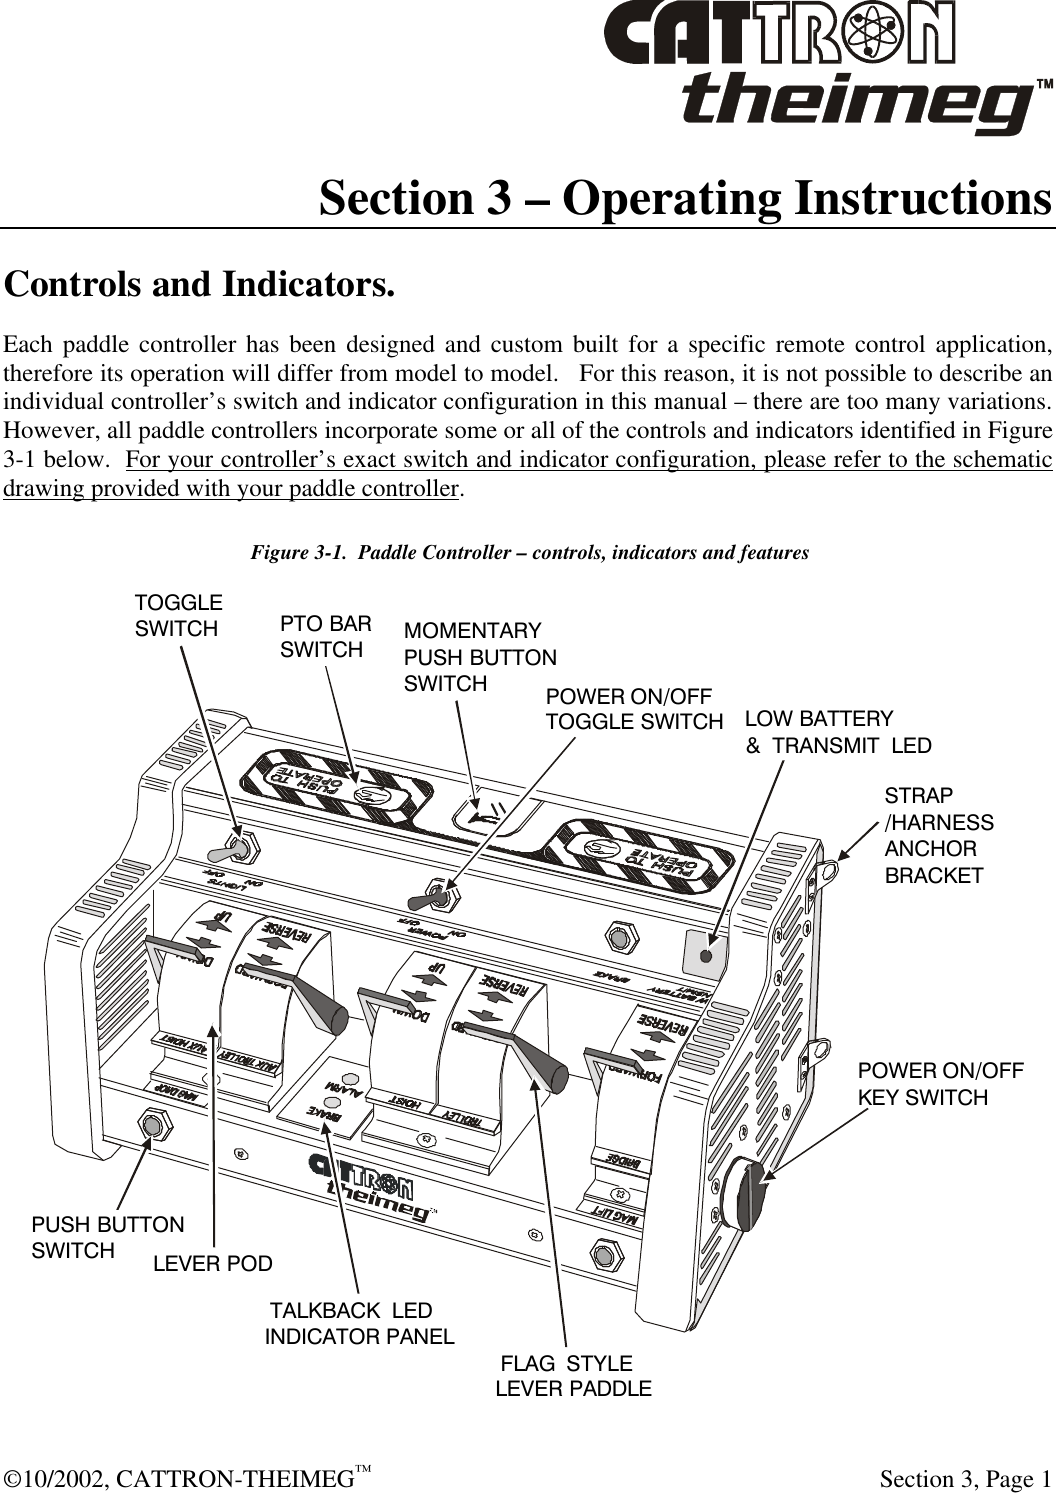  ©10/2002, CATTRON-THEIMEG™   Section 3, Page 1 Section 3 – Operating Instructions  Controls and Indicators. Each paddle controller has been designed and custom built for a specific remote control application, therefore its operation will differ from model to model.   For this reason, it is not possible to describe an individual controller’s switch and indicator configuration in this manual – there are too many variations.  However, all paddle controllers incorporate some or all of the controls and indicators identified in Figure 3-1 below.  For your controller’s exact switch and indicator configuration, please refer to the schematic drawing provided with your paddle controller.  Figure 3-1.  Paddle Controller – controls, indicators and features PTO BARSWITCHSTRAP/HARNESSANCHORBRACKET POWER ON/OFFTOGGLE SWITCHPOWER ON/OFFKEY SWITCH‘FLAG’ STYLELEVER PADDLE‘LOW BATTERY’ &amp; ‘TRANSMIT’ LEDMOMENTARYPUSH BUTTONSWITCH PUSH BUTTONSWITCH ‘TALKBACK’ LEDINDICATOR PANELLEVER PODTOGGLESWITCH 